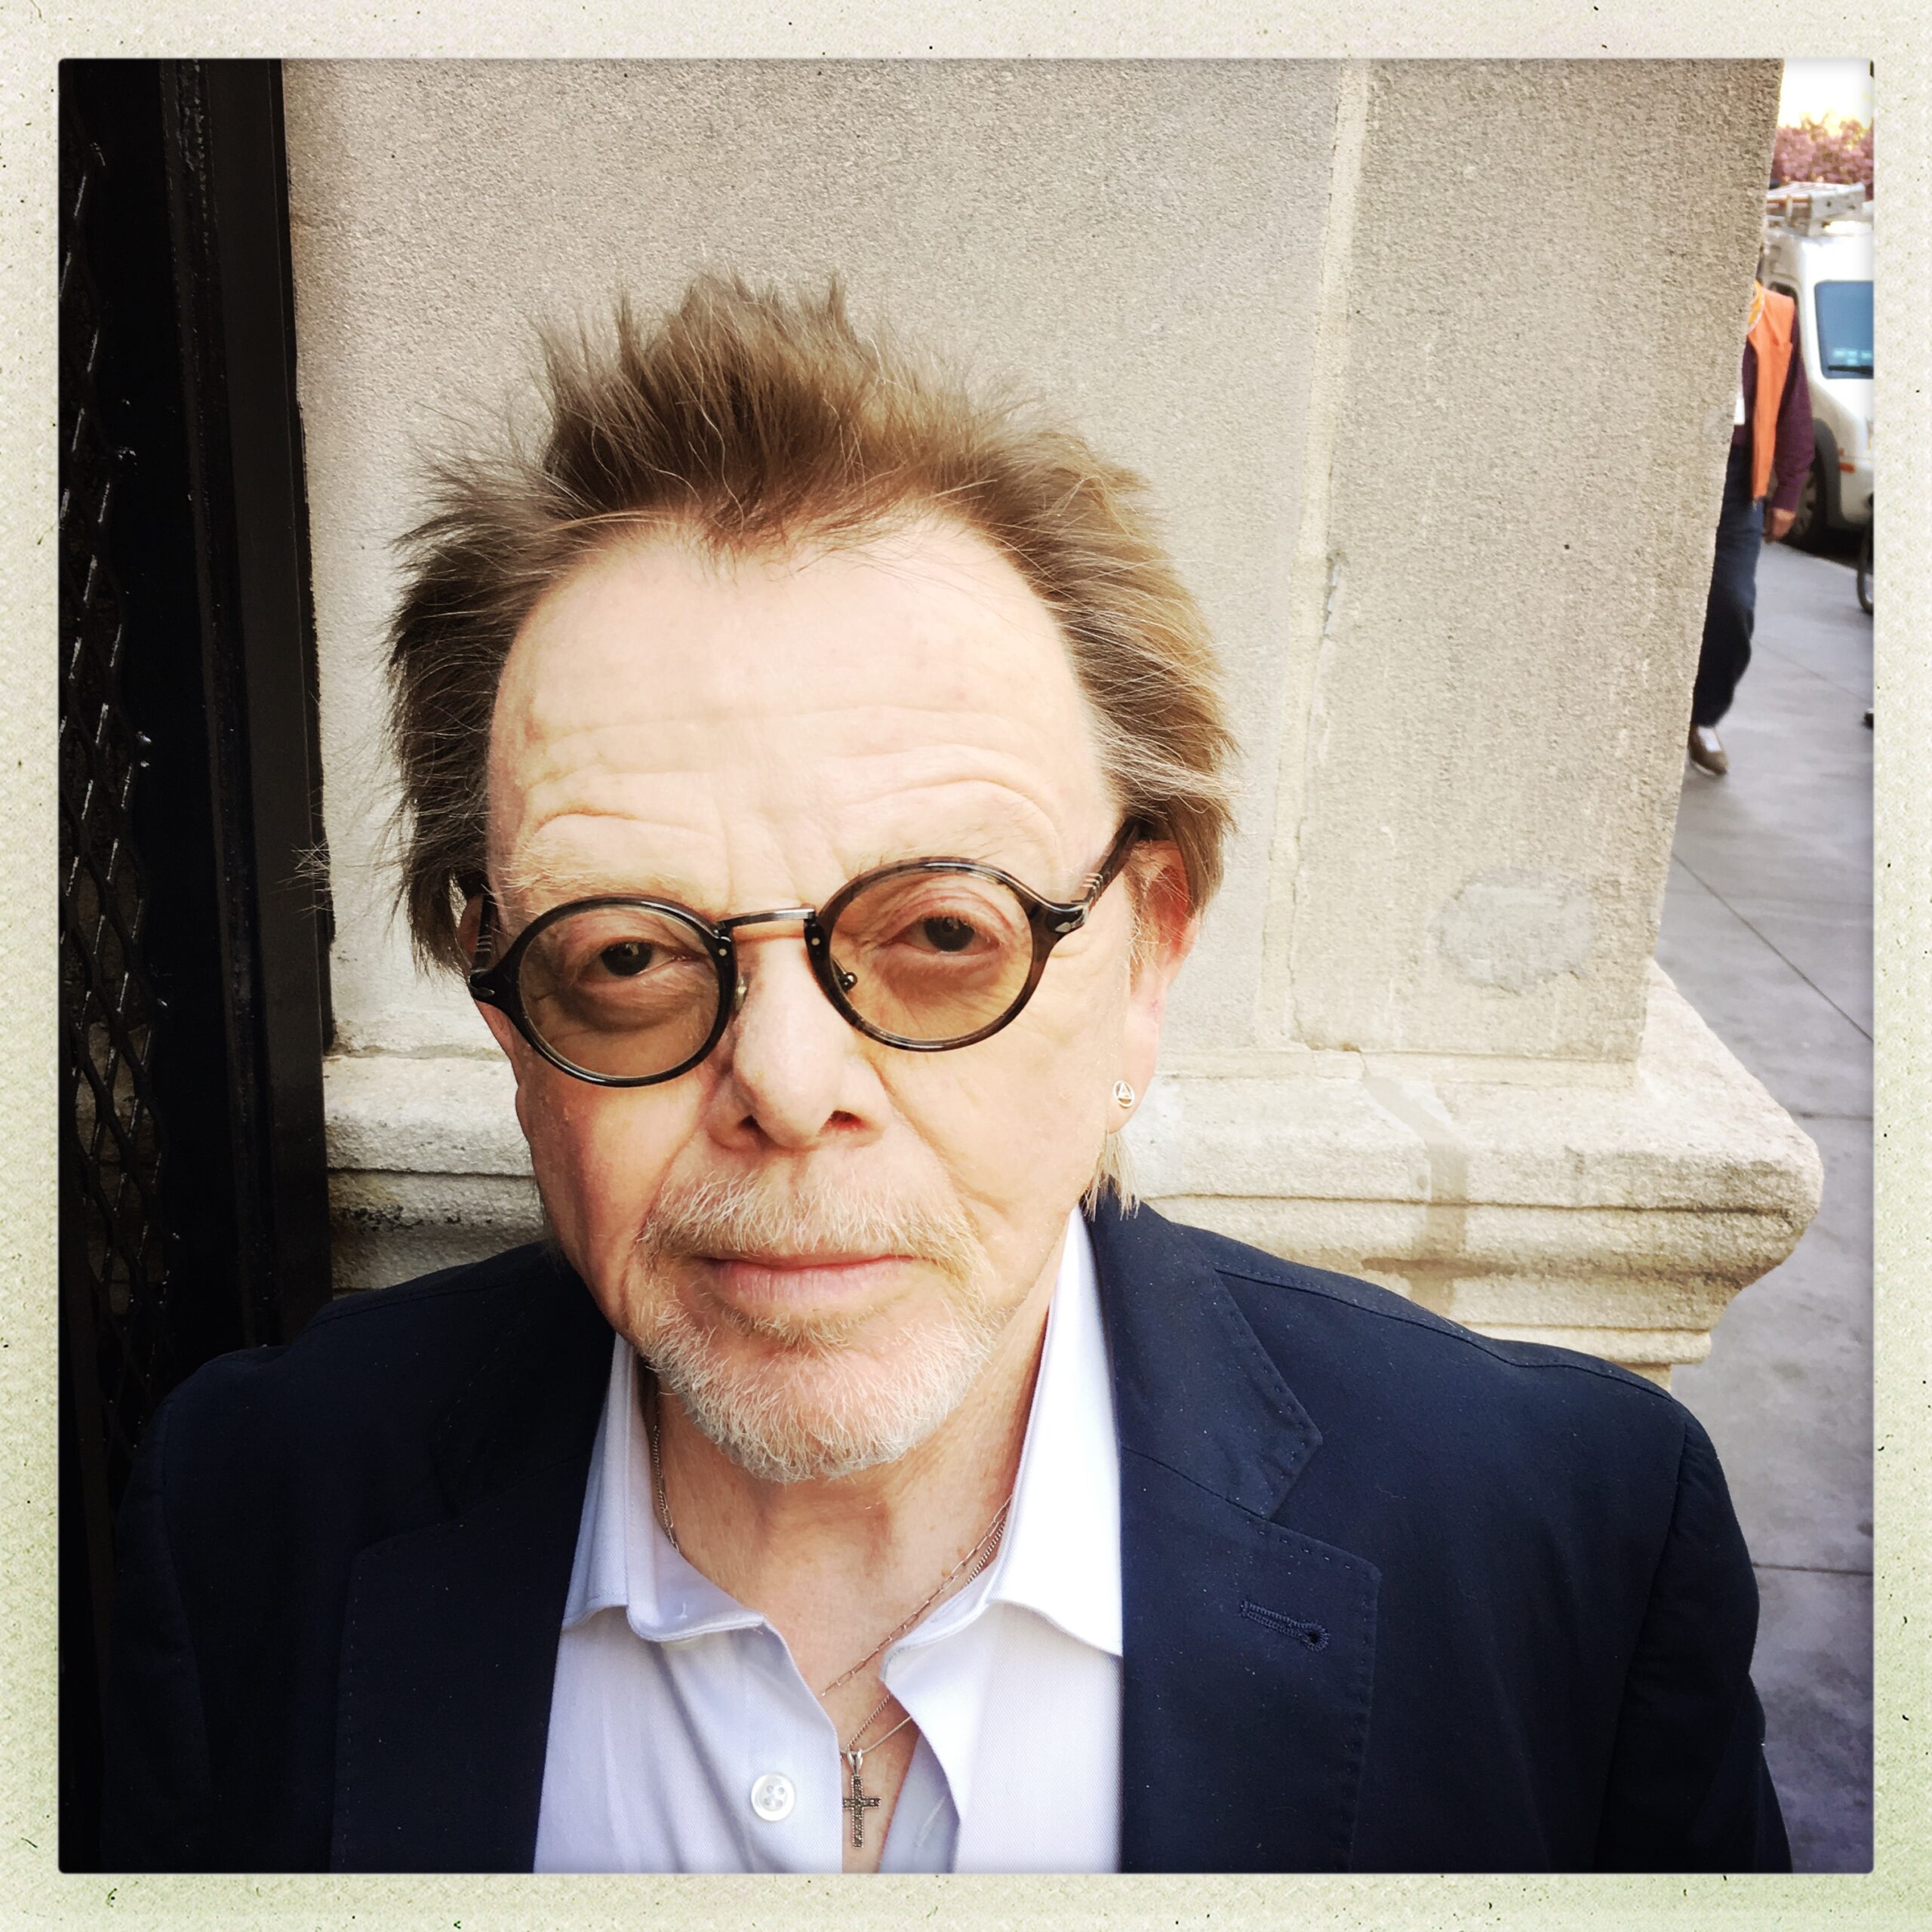 AN AFTERNOON WITH PAUL WILLIAMS